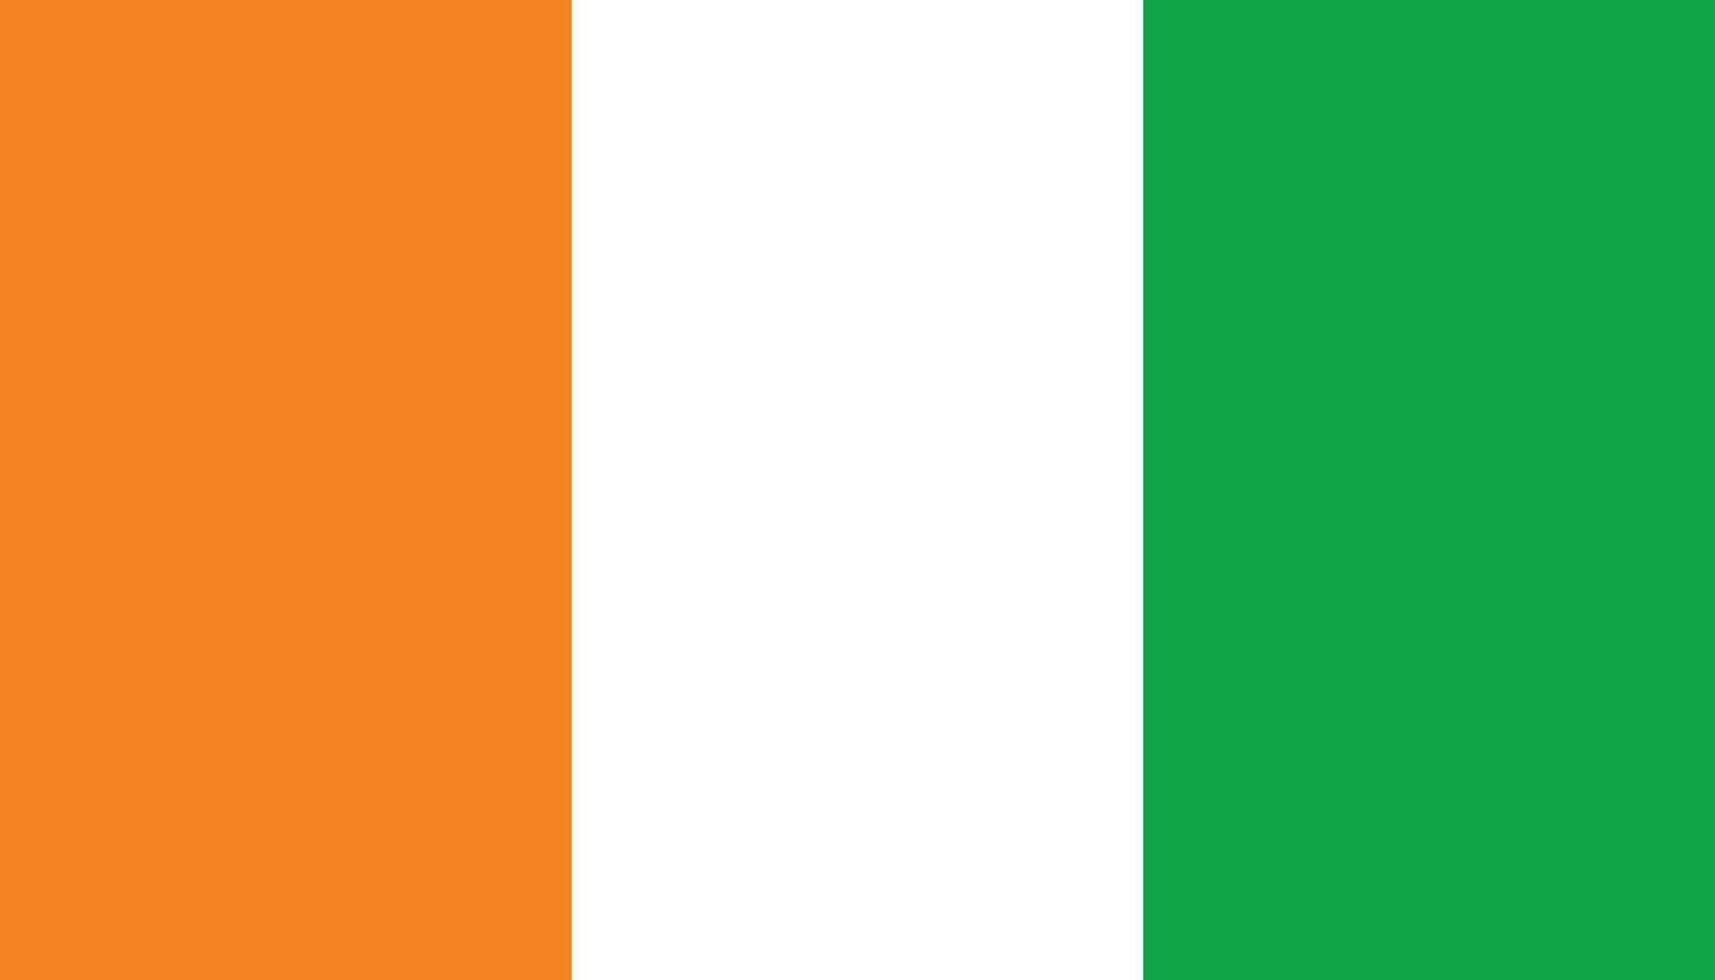 Ivory coast flag icon in flat style. Cote d'ivoire national sign vector illustration. Politic business concept.